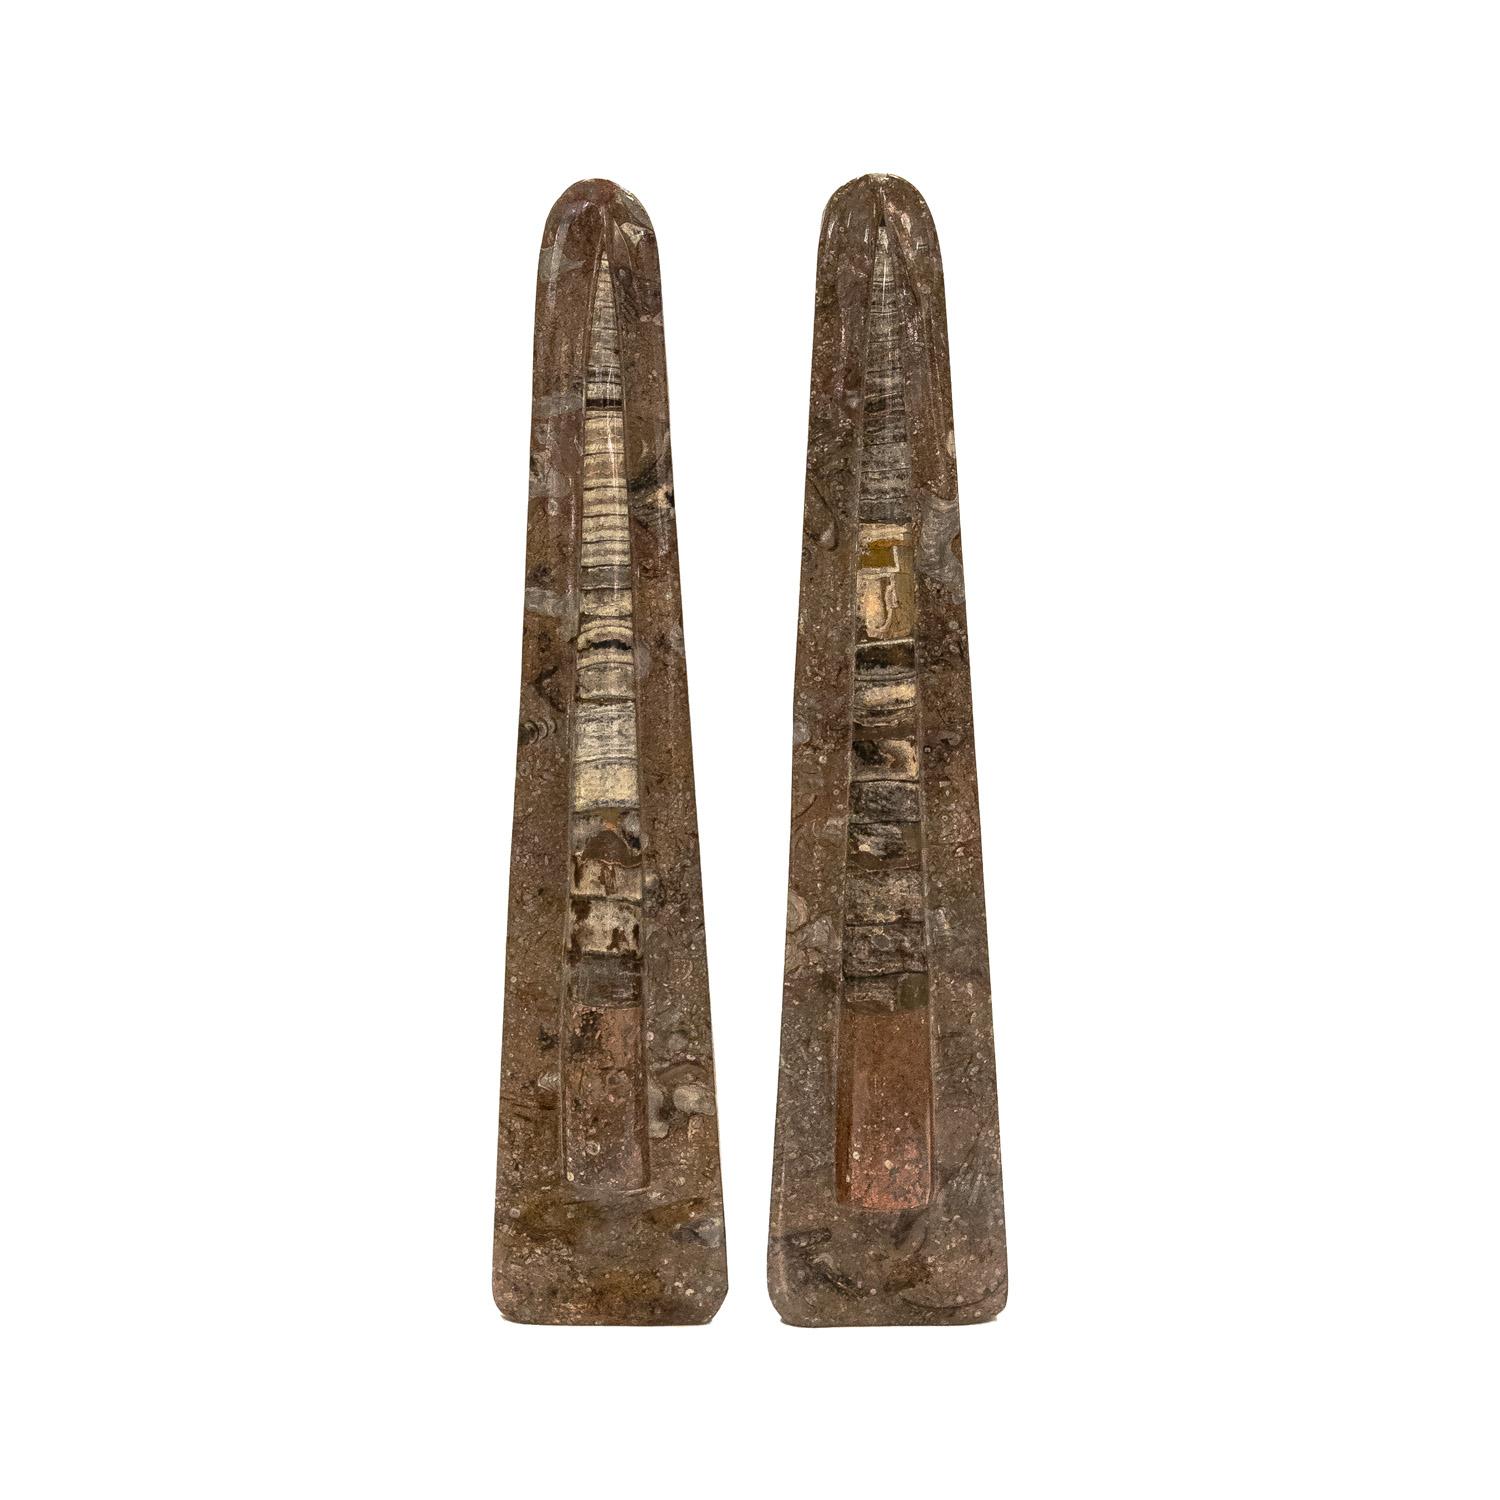 Impressive pair of obelisk shaped polished extinct fossil sculptures (Orthoceras) with beautiful organic variations which date back 400 million years from Sweden and the Baltic States. They were sold in the United States in the 1980's. These